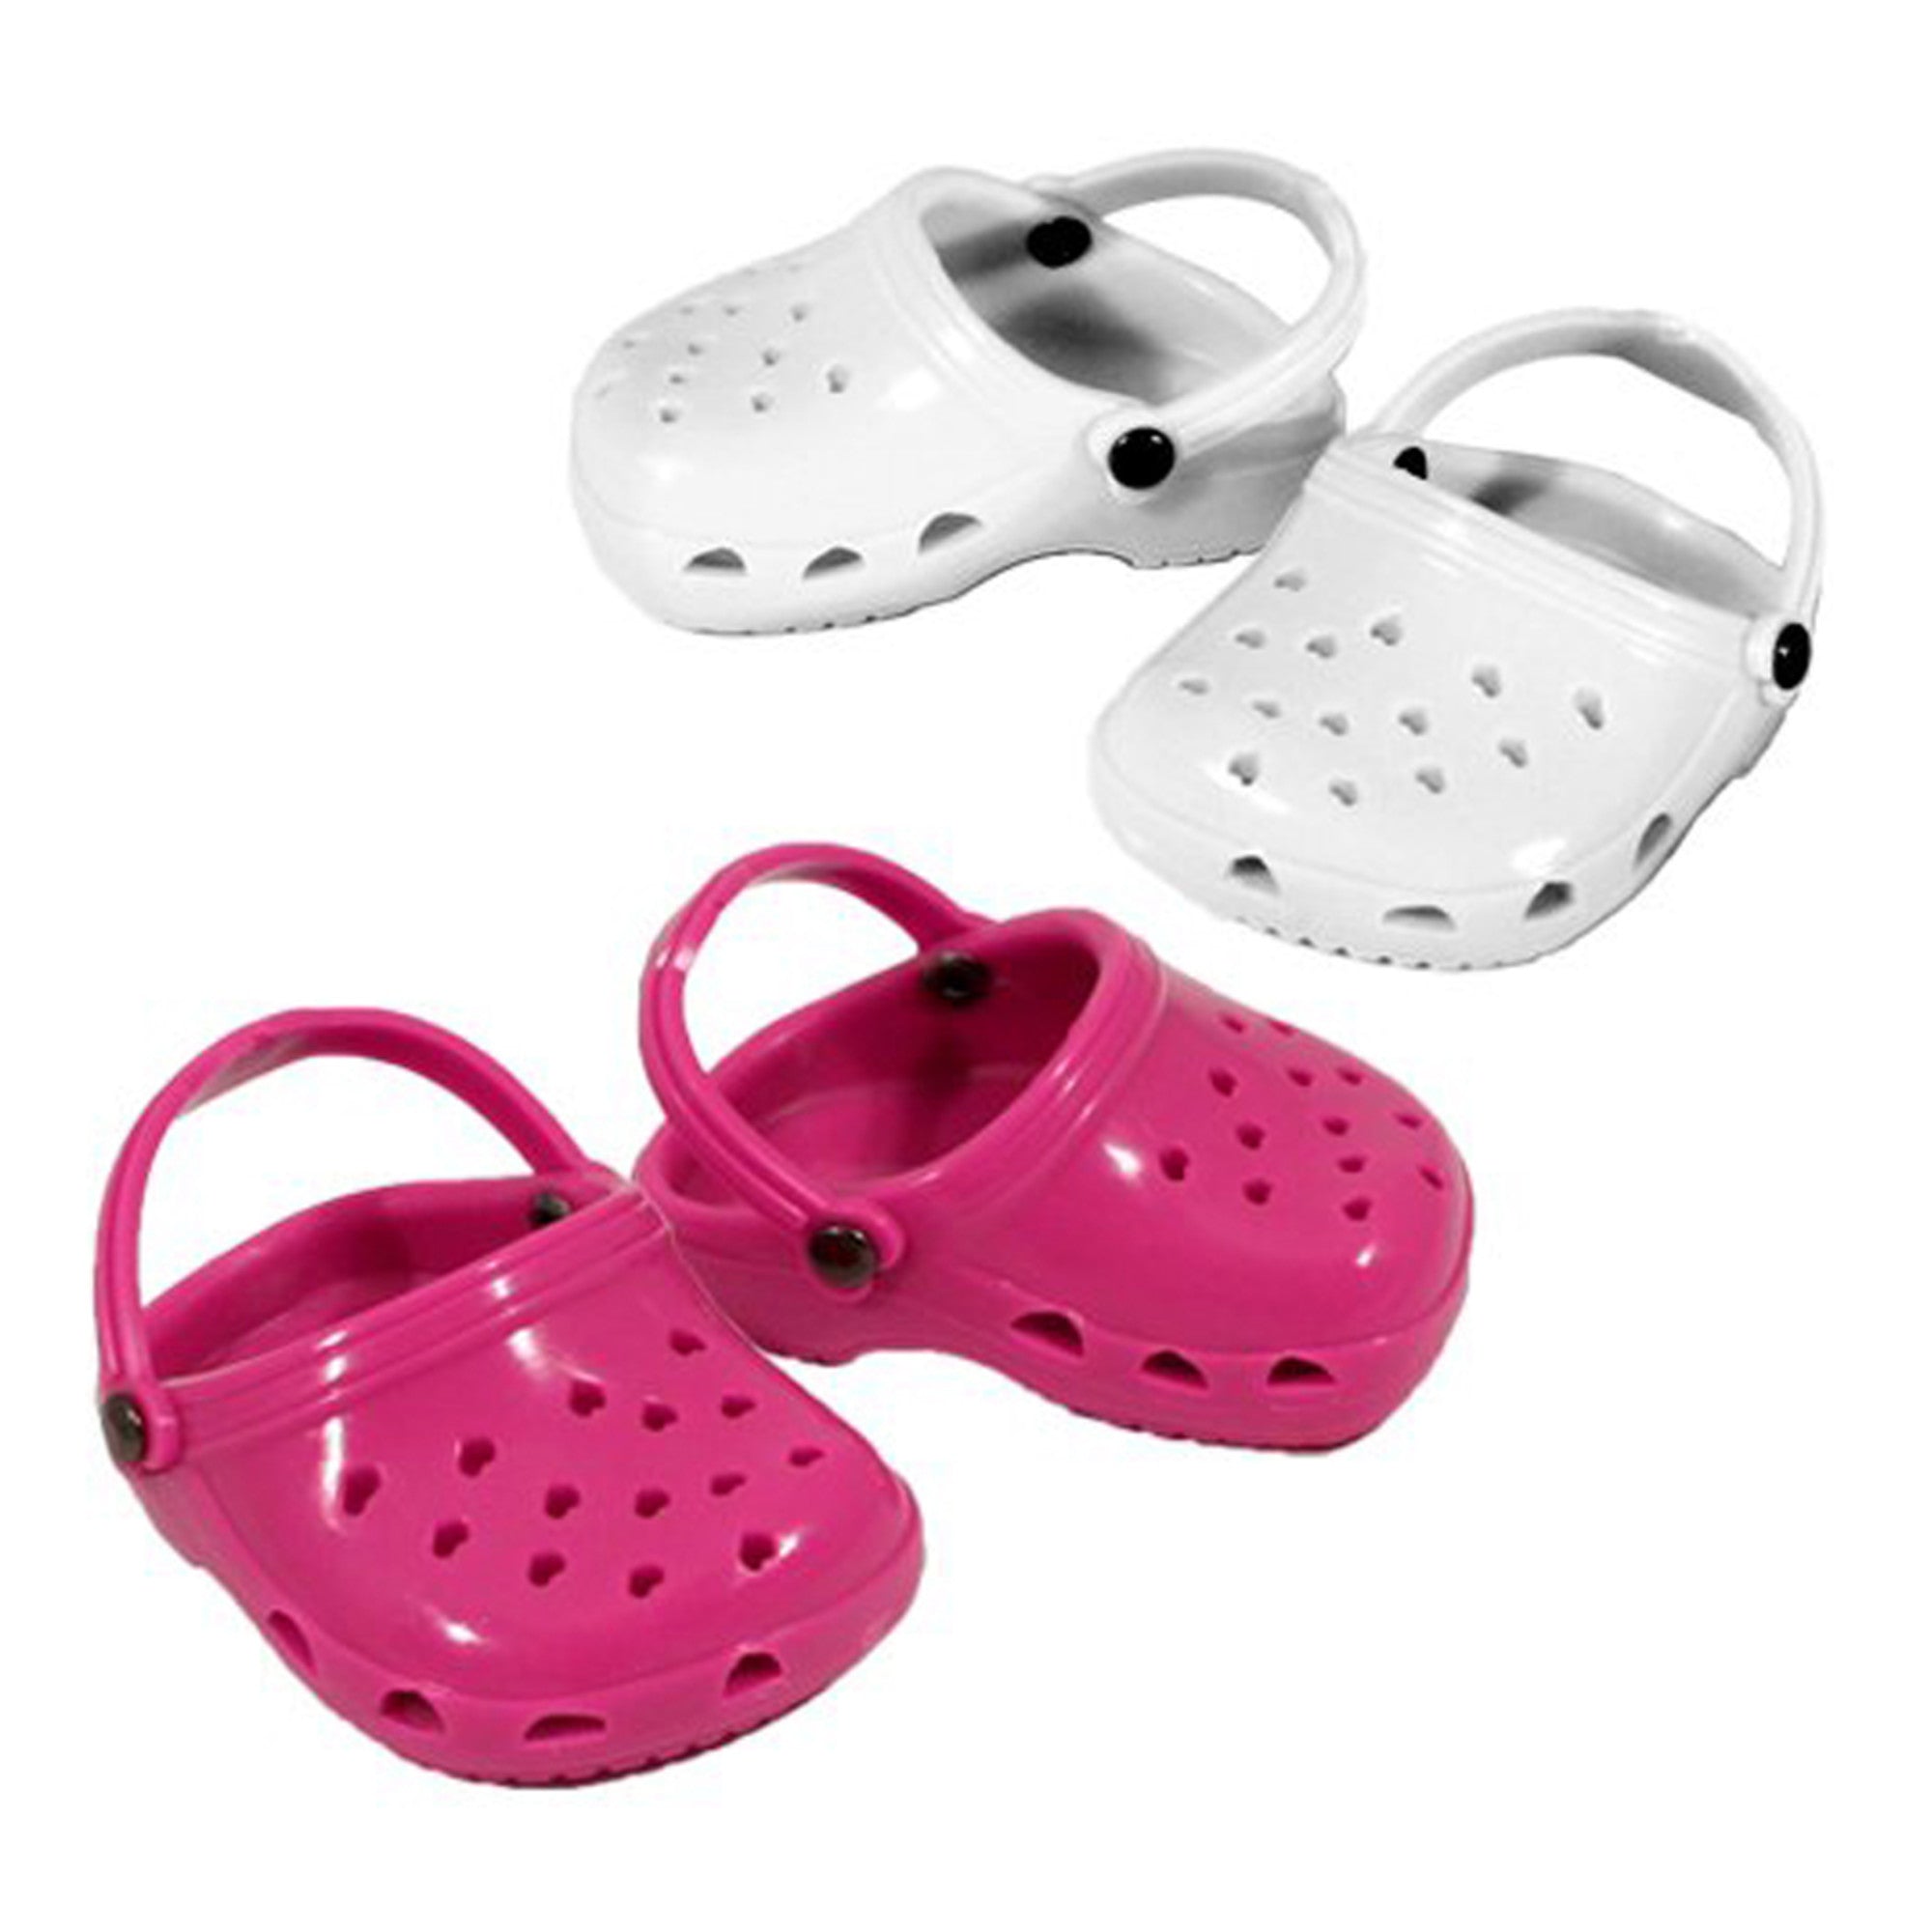 Sophia’s Set of 2 Croc-Inspired Slip-On Casual Solid-Colored Mix & Match Polliwog Shoes for 18” Dolls, Pink & White